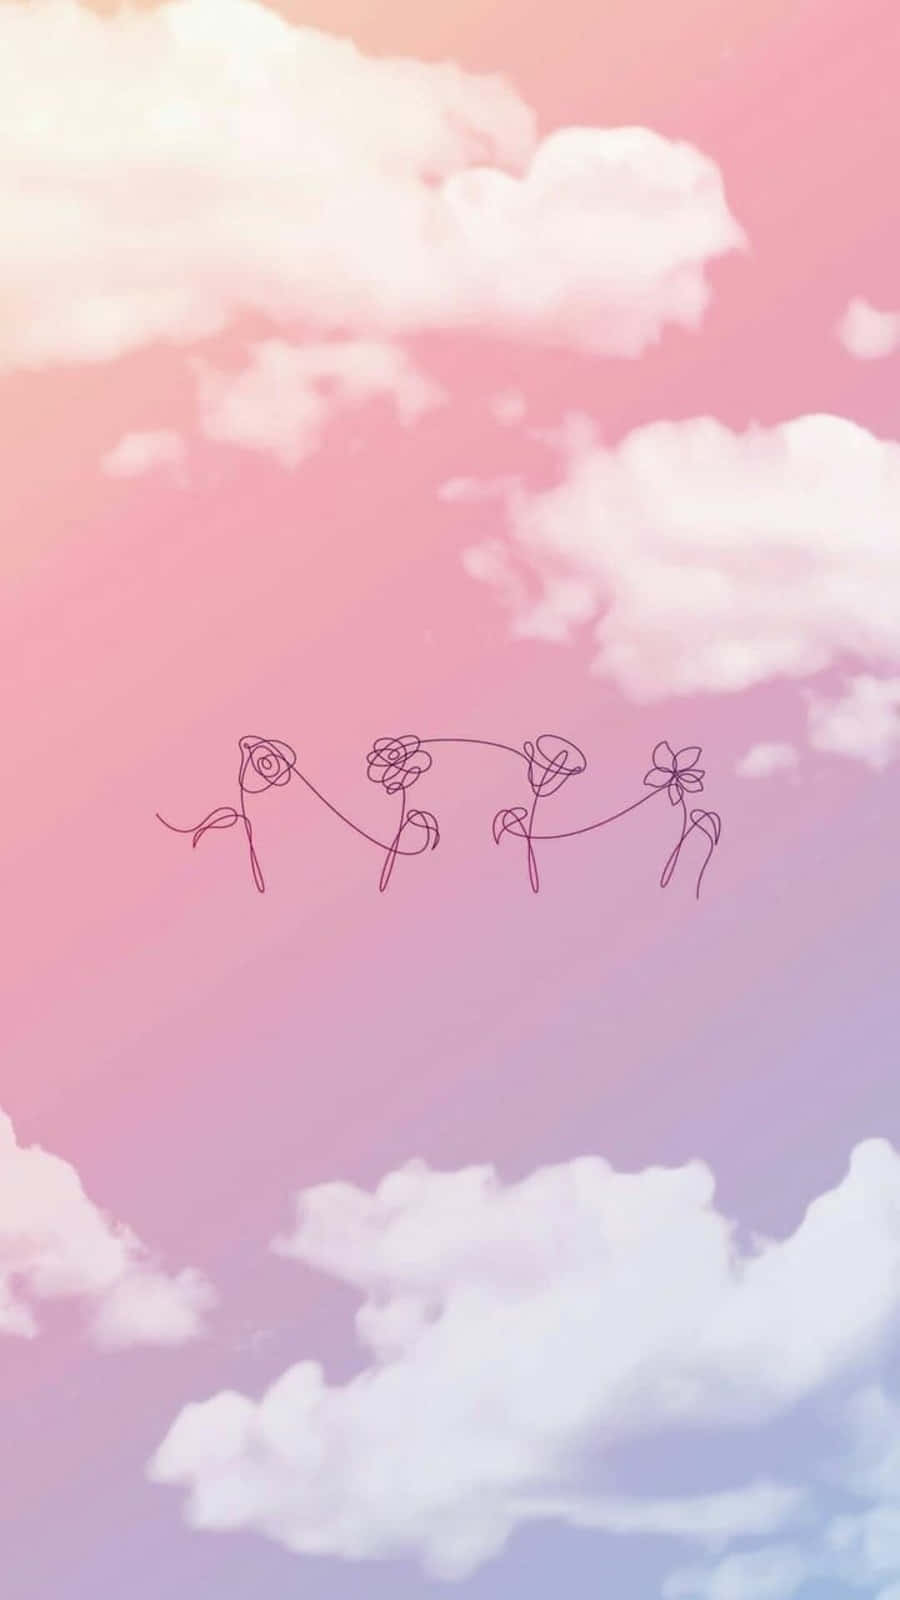 Celebrate self-love with BTS Love Yourself Wallpaper! Wallpaper